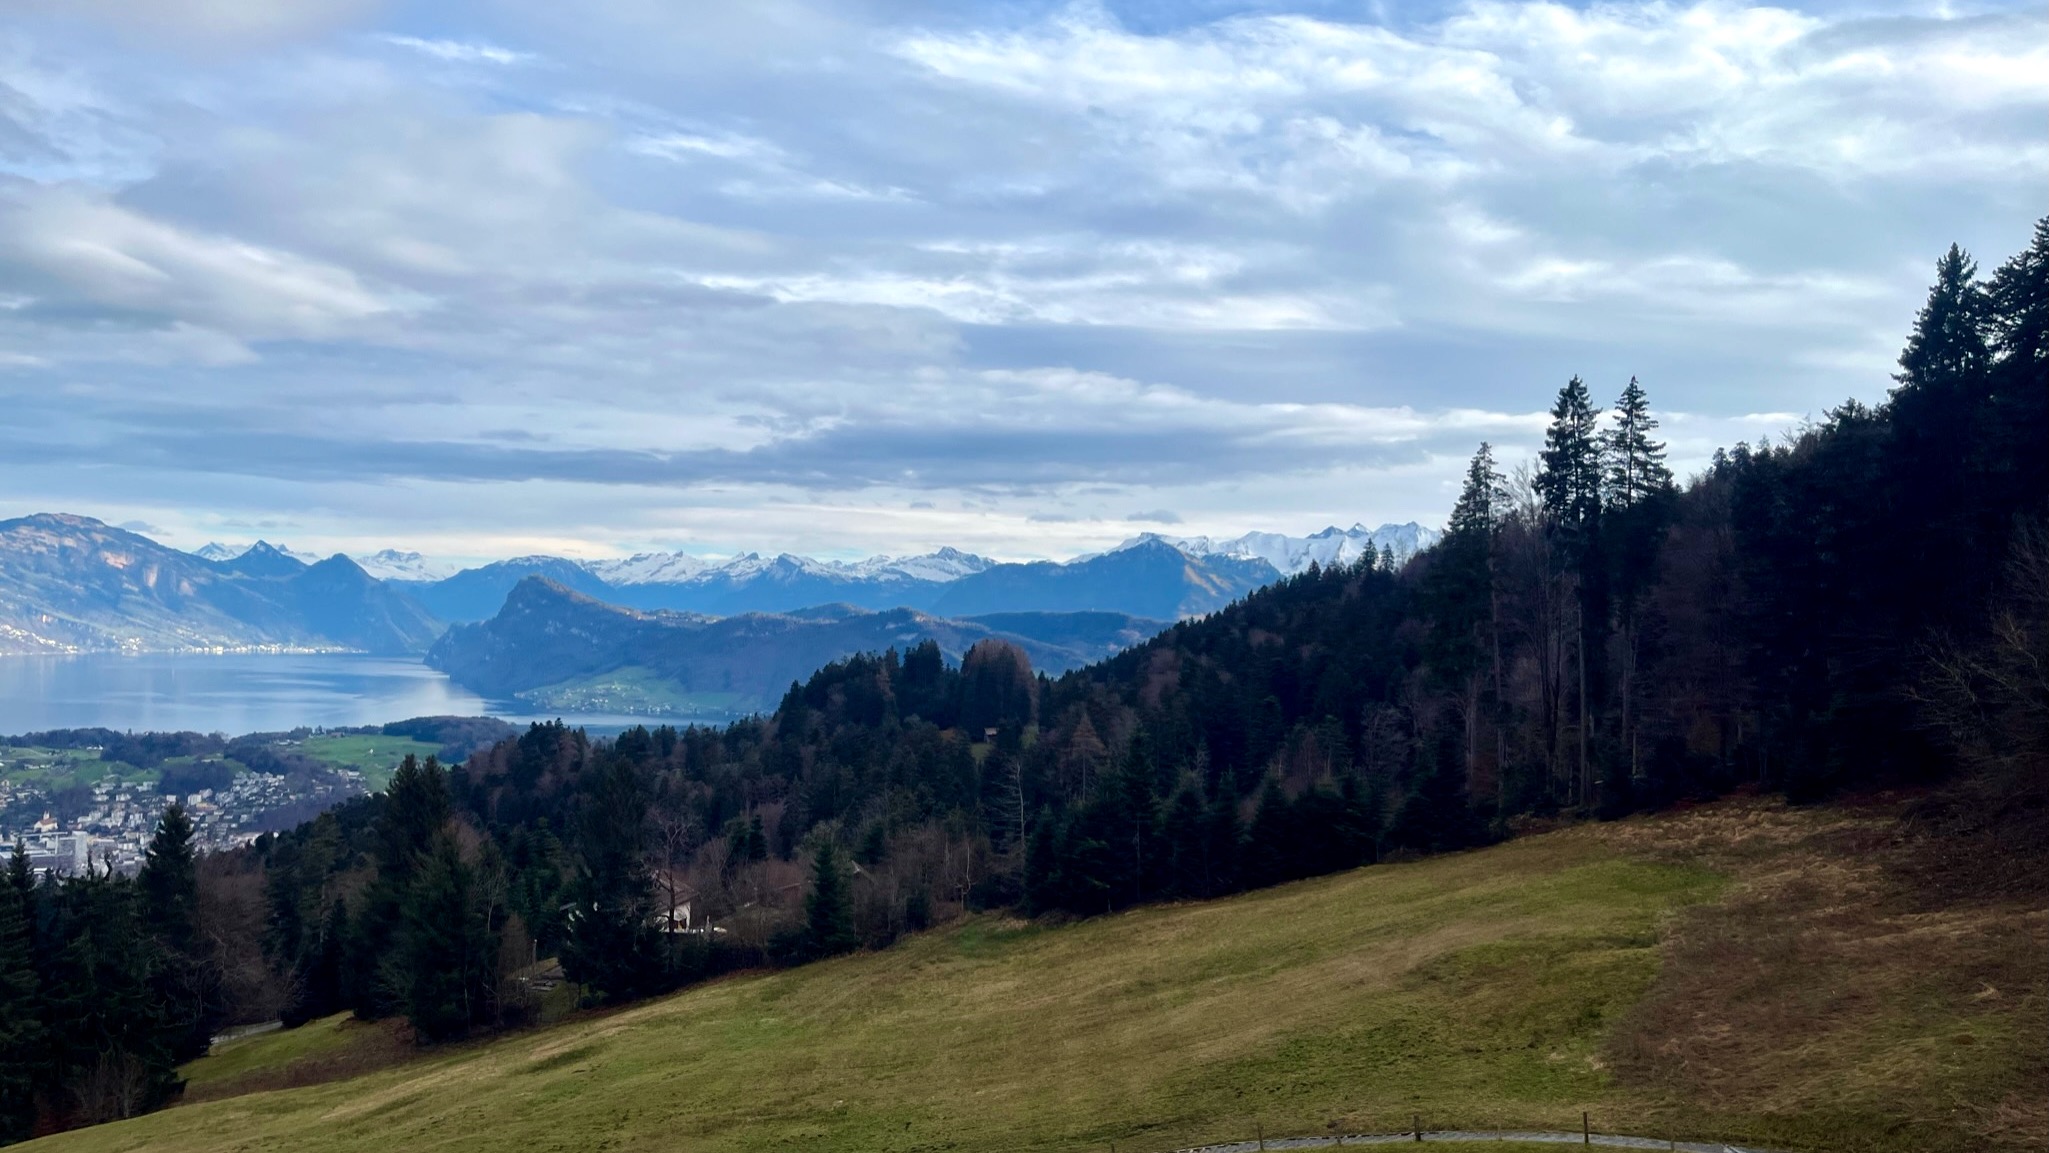 the view from pilatus gondola towards lucerne with mountains and lake in the background and green grassy alp mountains in the foreground